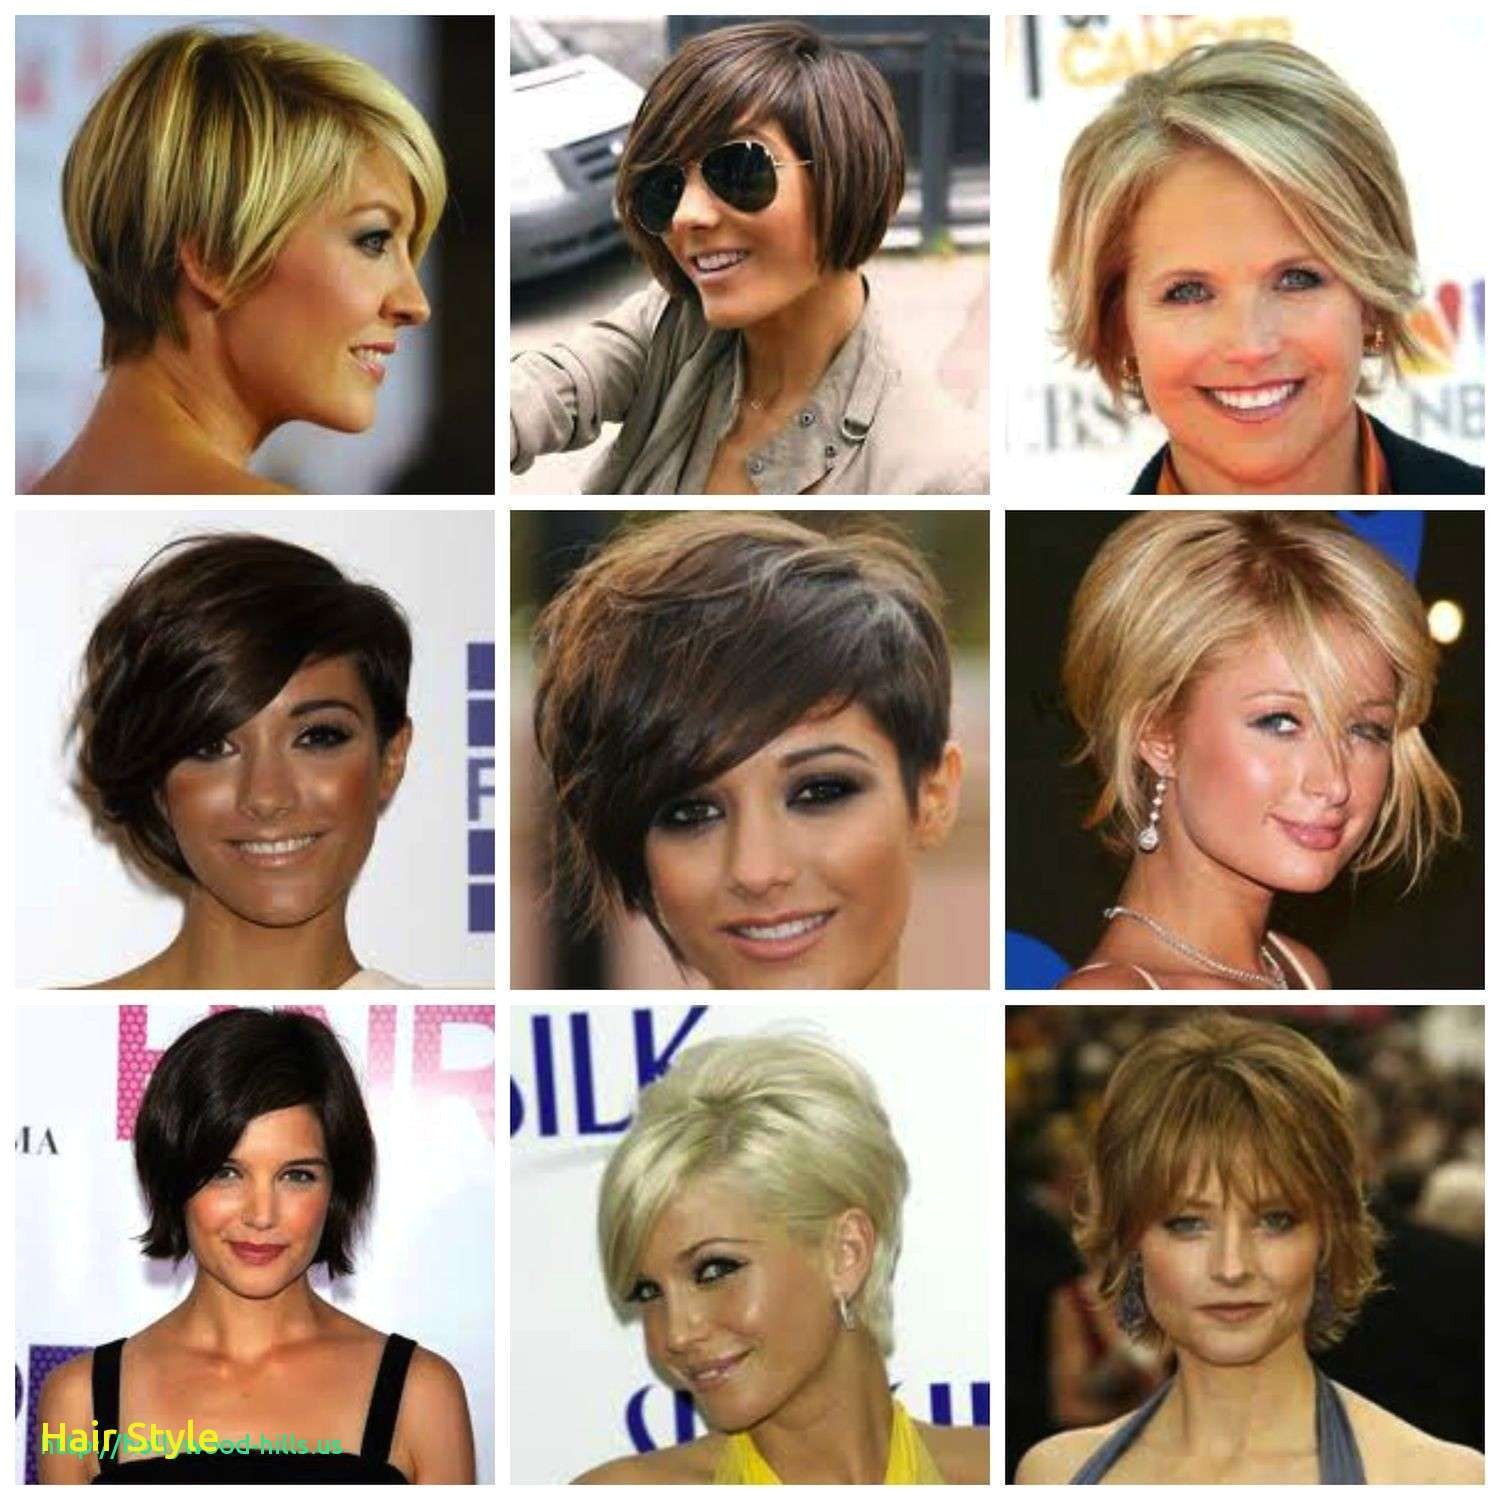 hairstyles for women inspirational new hair styles luxury i pinimg 1200x 0d 60 8a 0d608a58a4bb3ed3b a